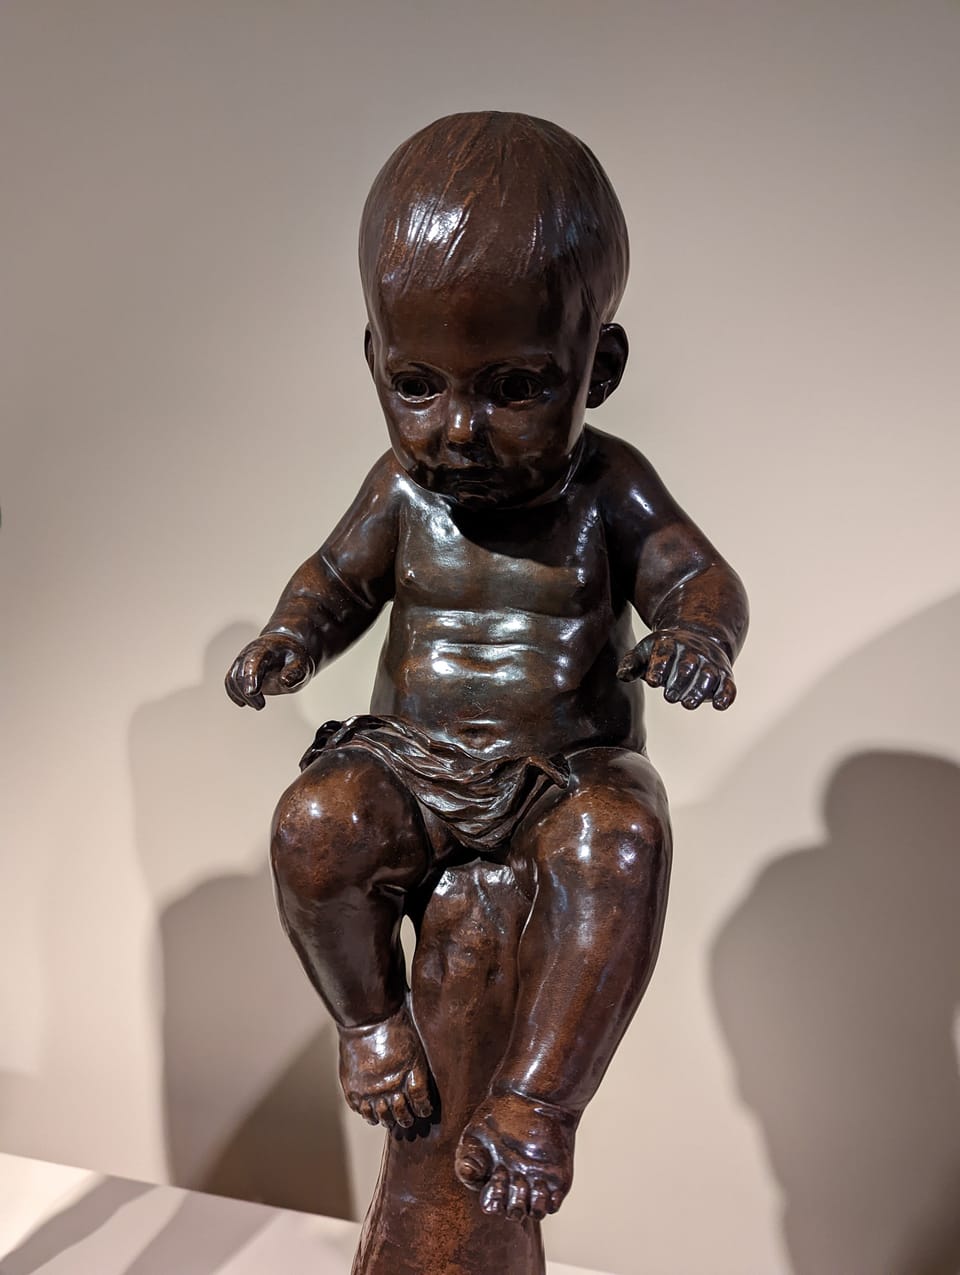 Sculpture of a baby sitting on an upturned hand - wishful thinking is the province of children